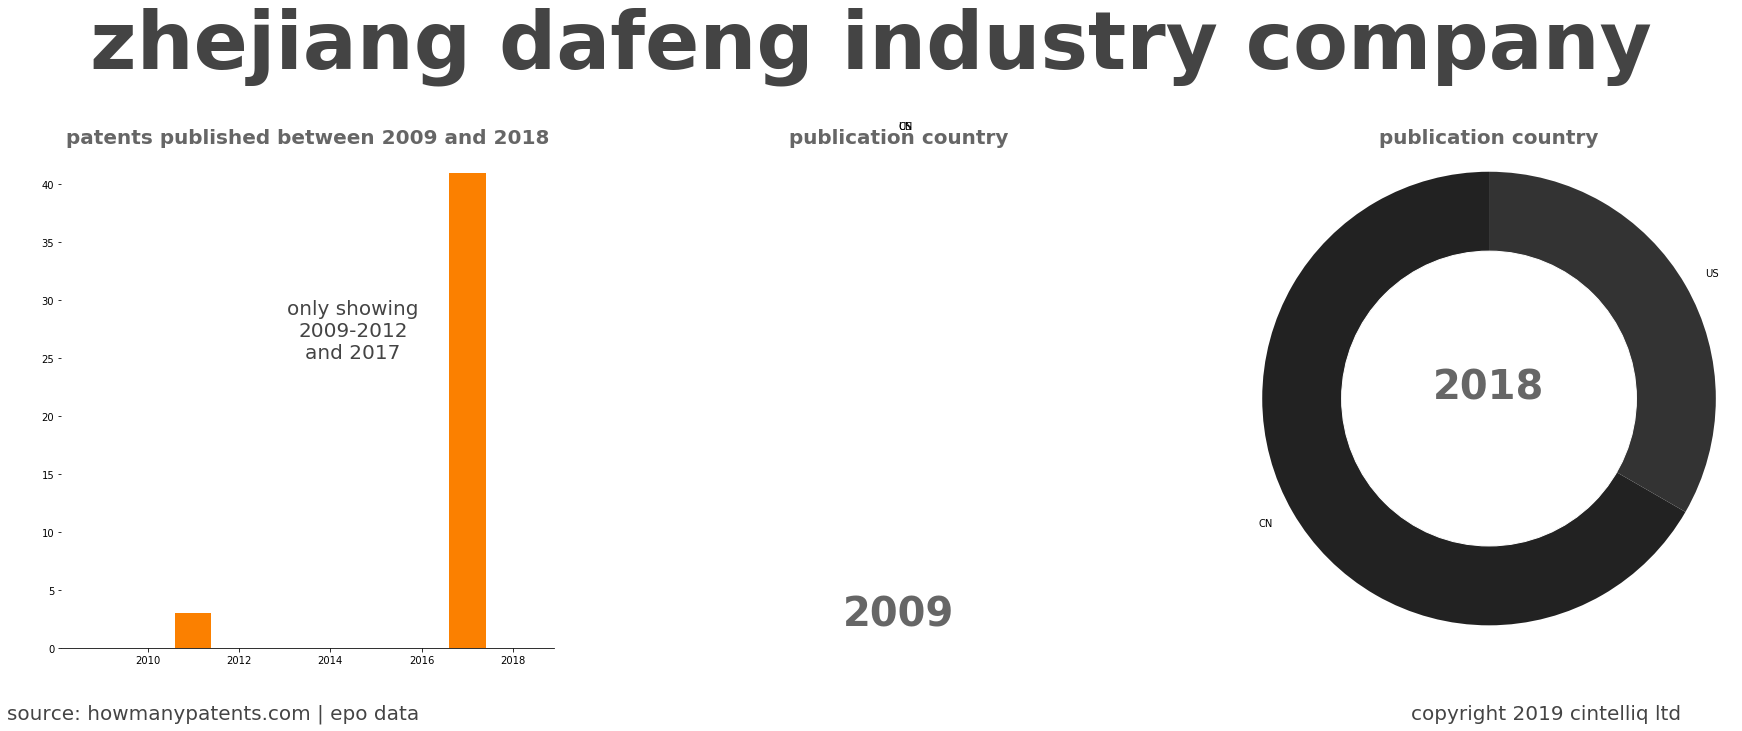 summary of patents for Zhejiang Dafeng Industry Company